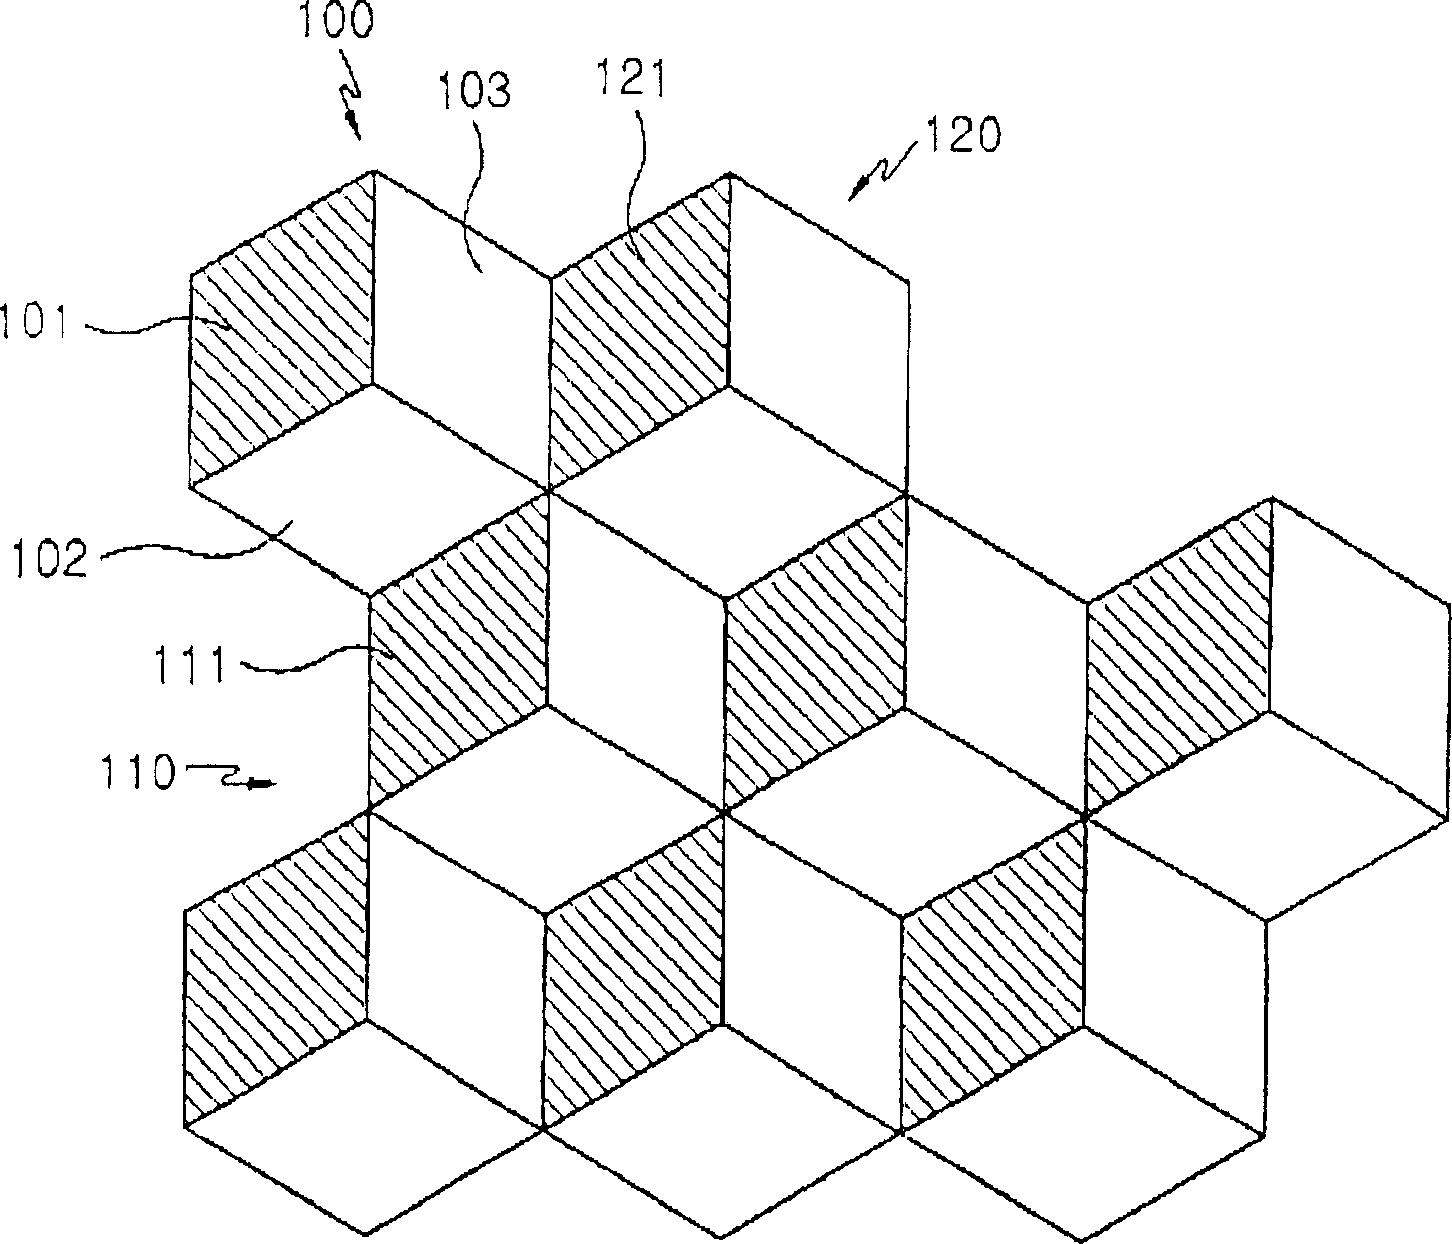 Resource allocation scheduling method for a cellular communication system